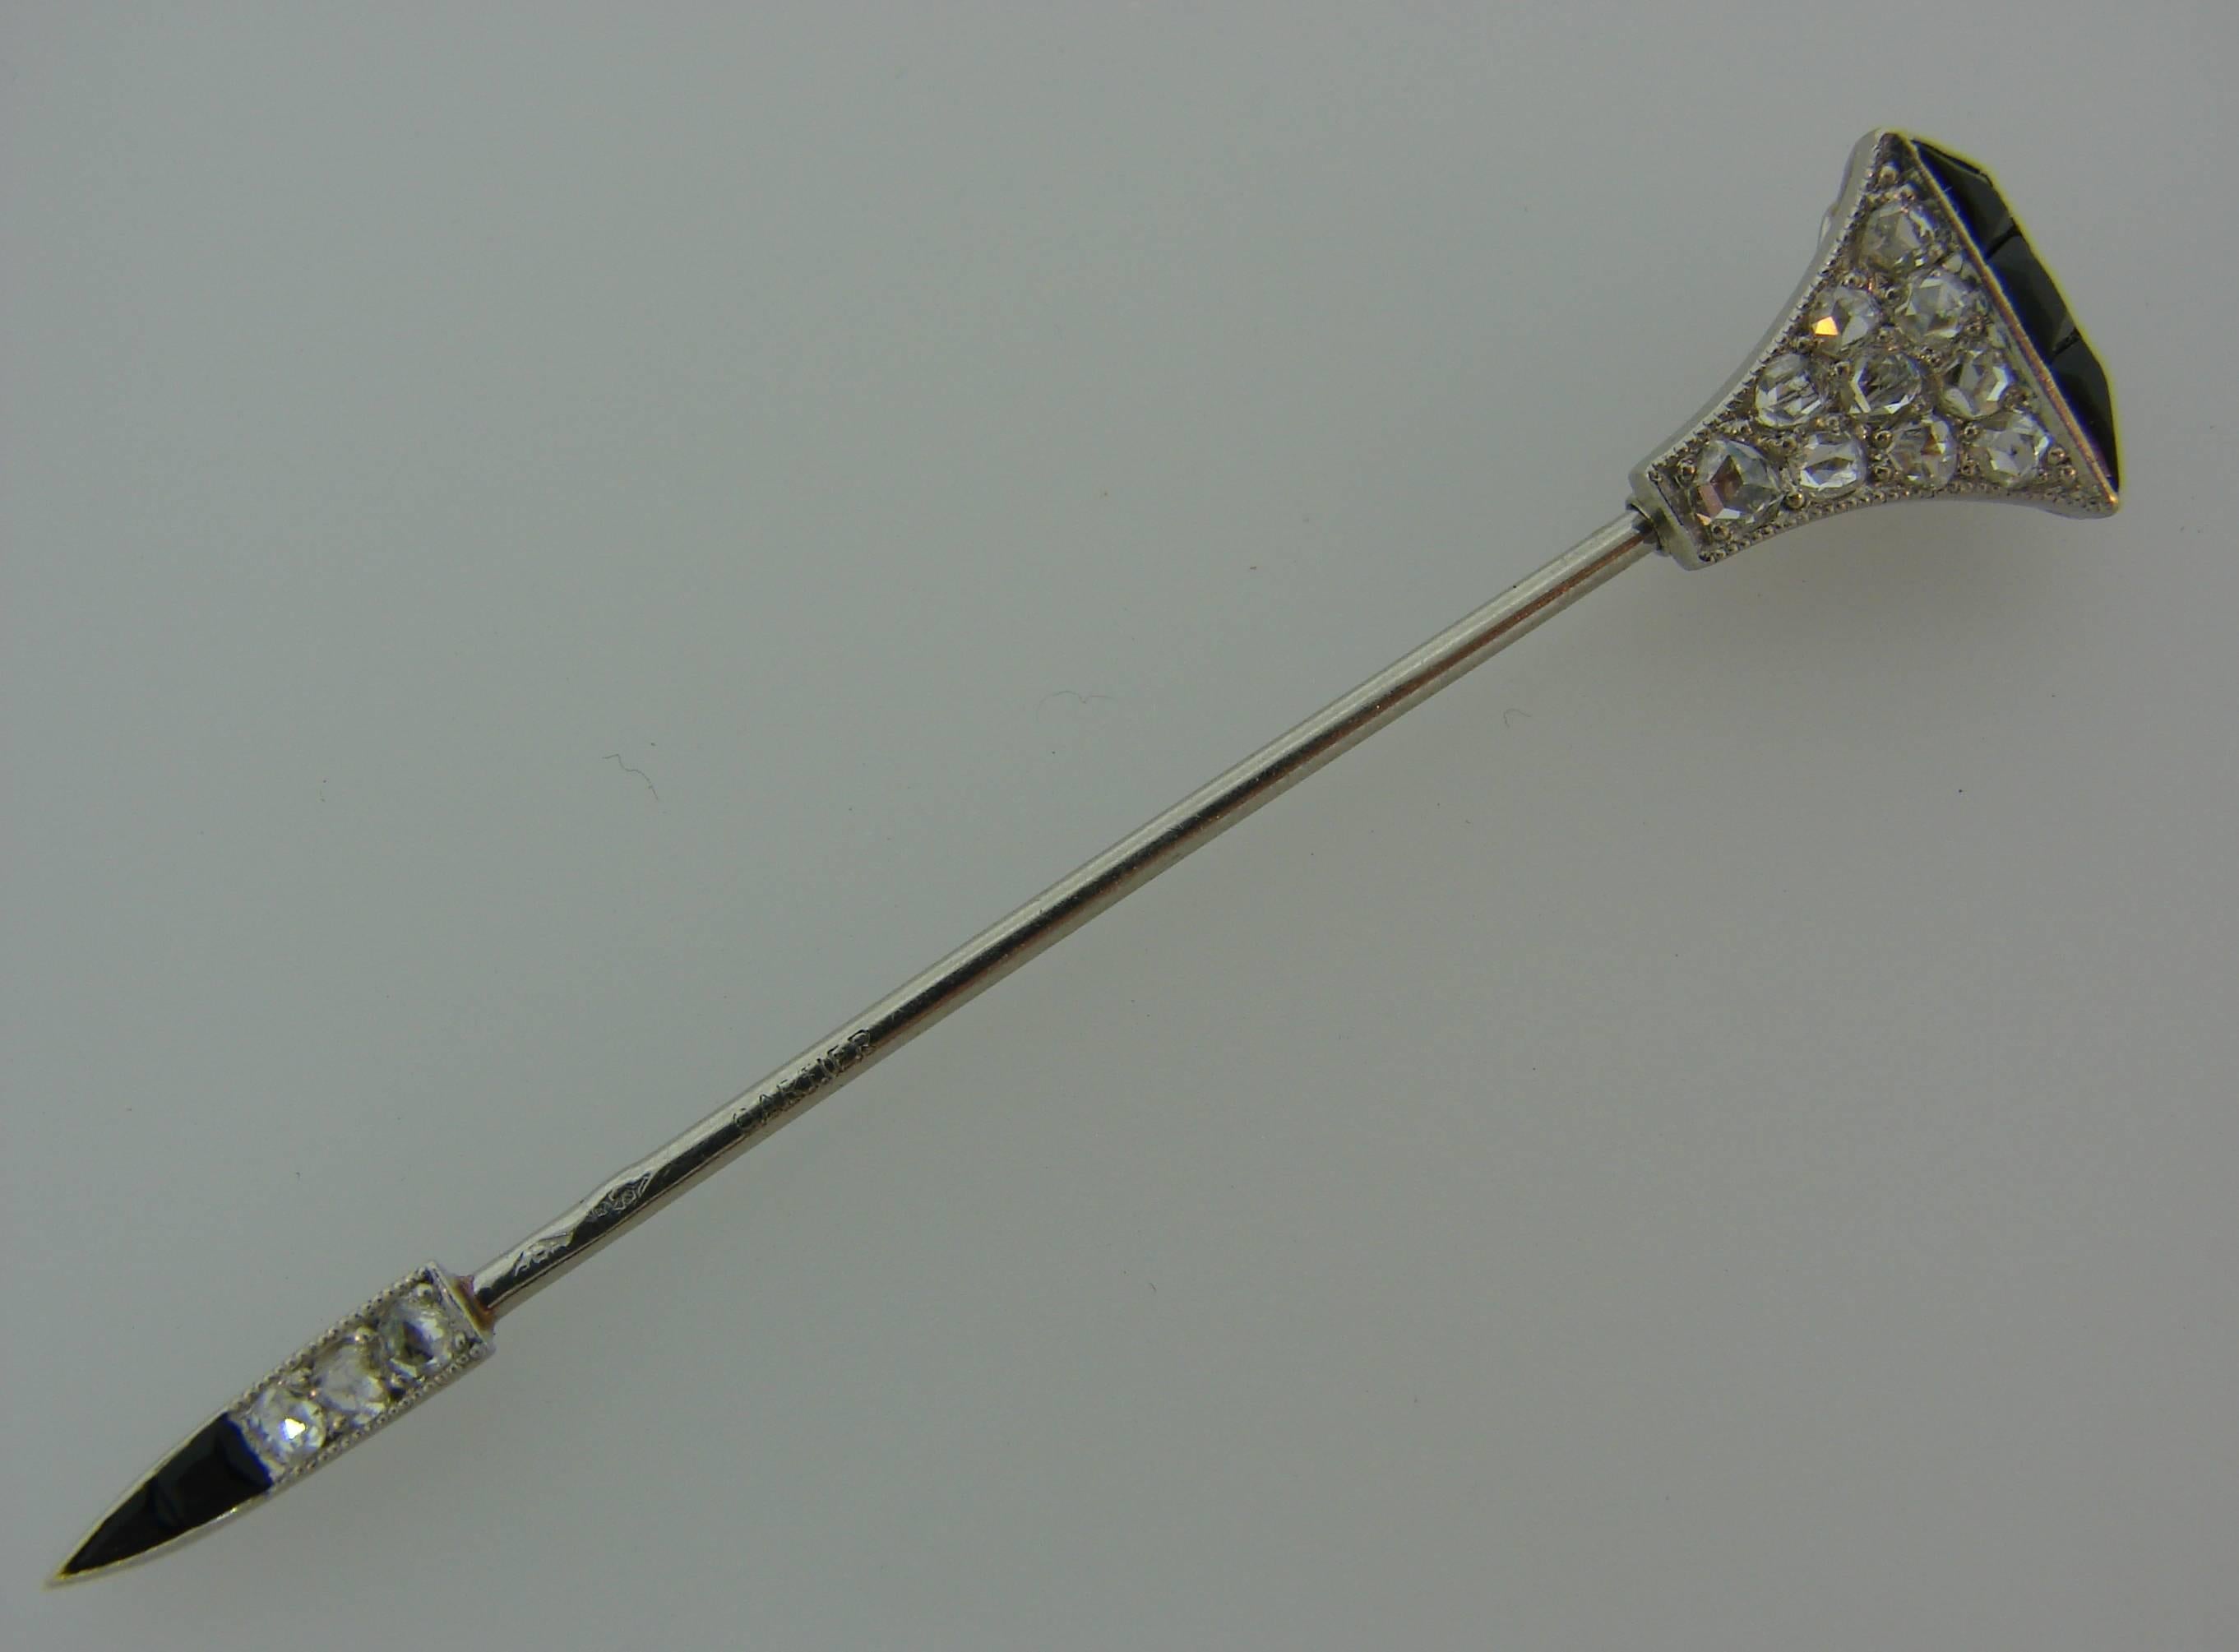 Chic and elegant jabot pin created by Cartier in Paris in the 1910s. Wearable and stylish accent to any outfit, the pin is a great addition to your jewelry collection. 
it is made of platinum and had black onyx and rose cut diamonds accents. 
The